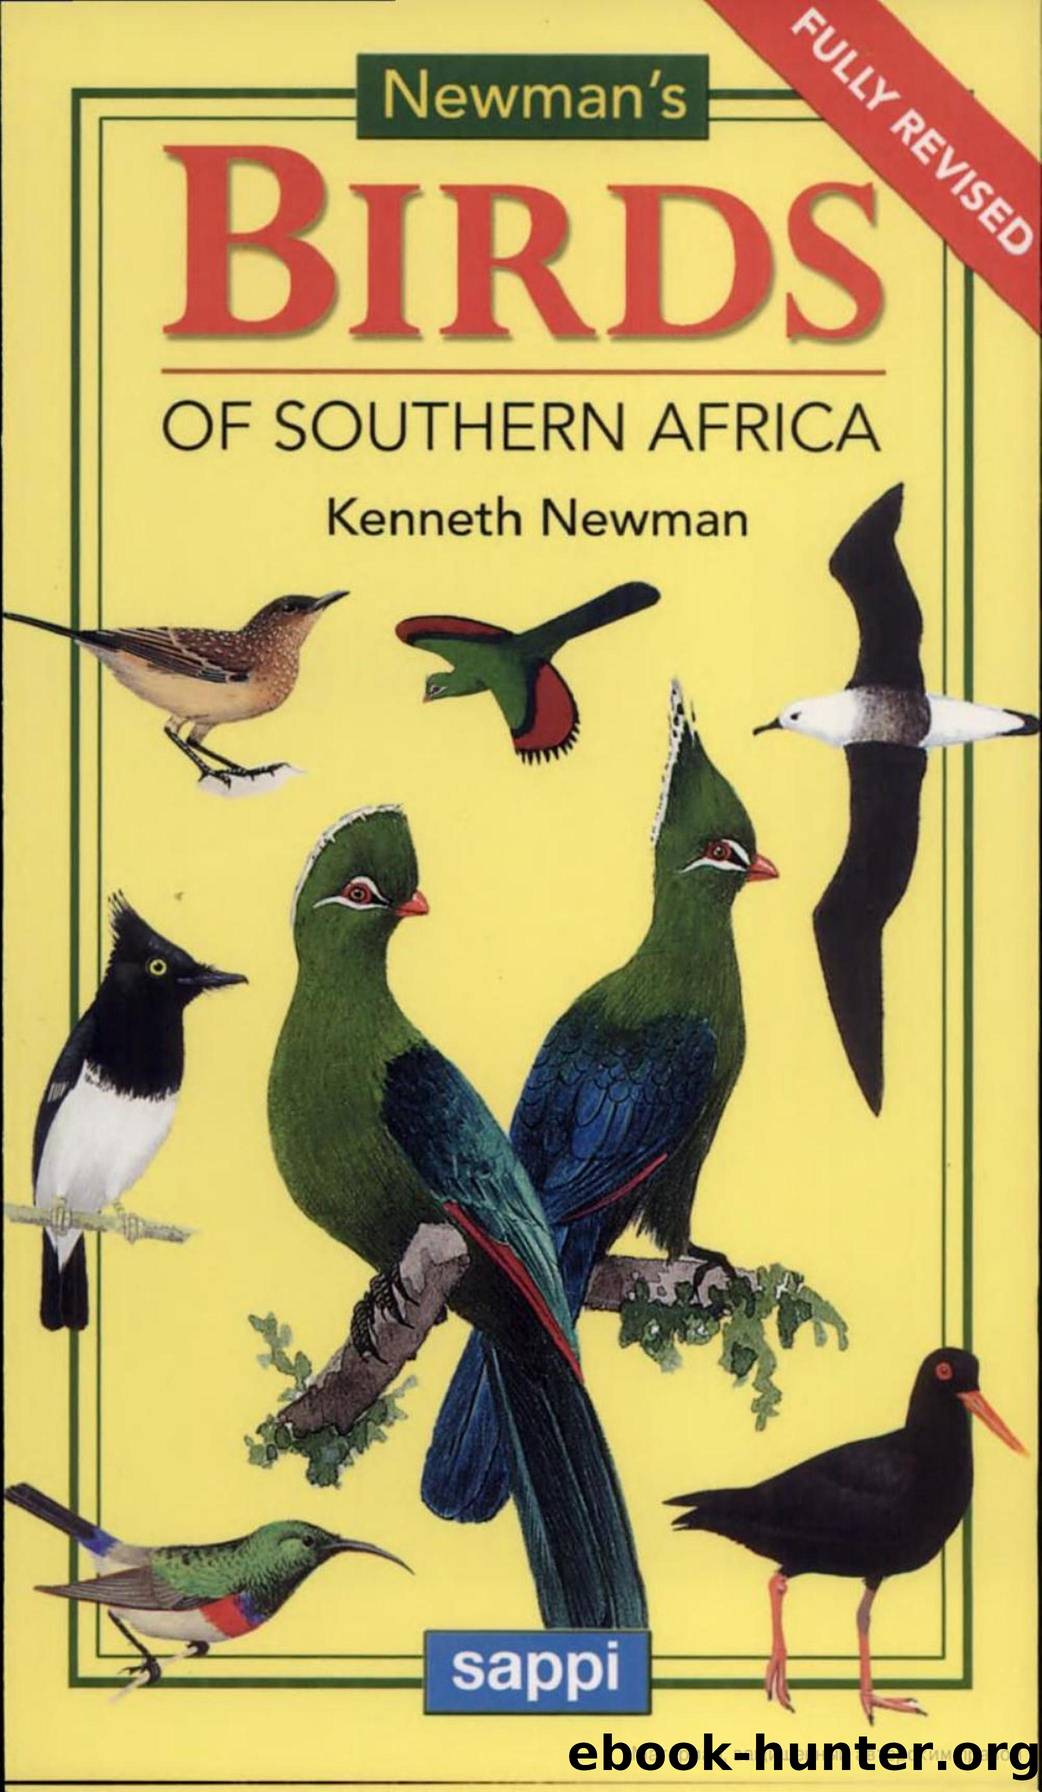 Newman's Birds of Southern Africa by ??????: Kenneth Newman